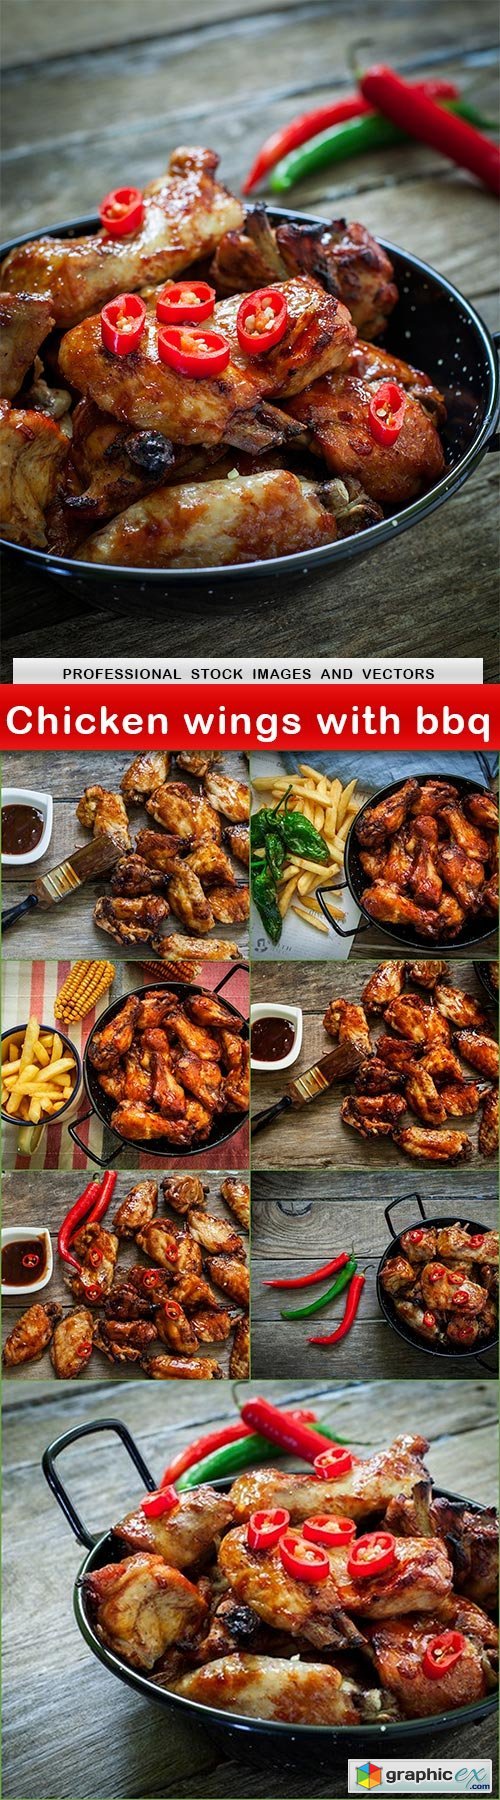 Chicken wings with bbq - 8 UHQ JPEG